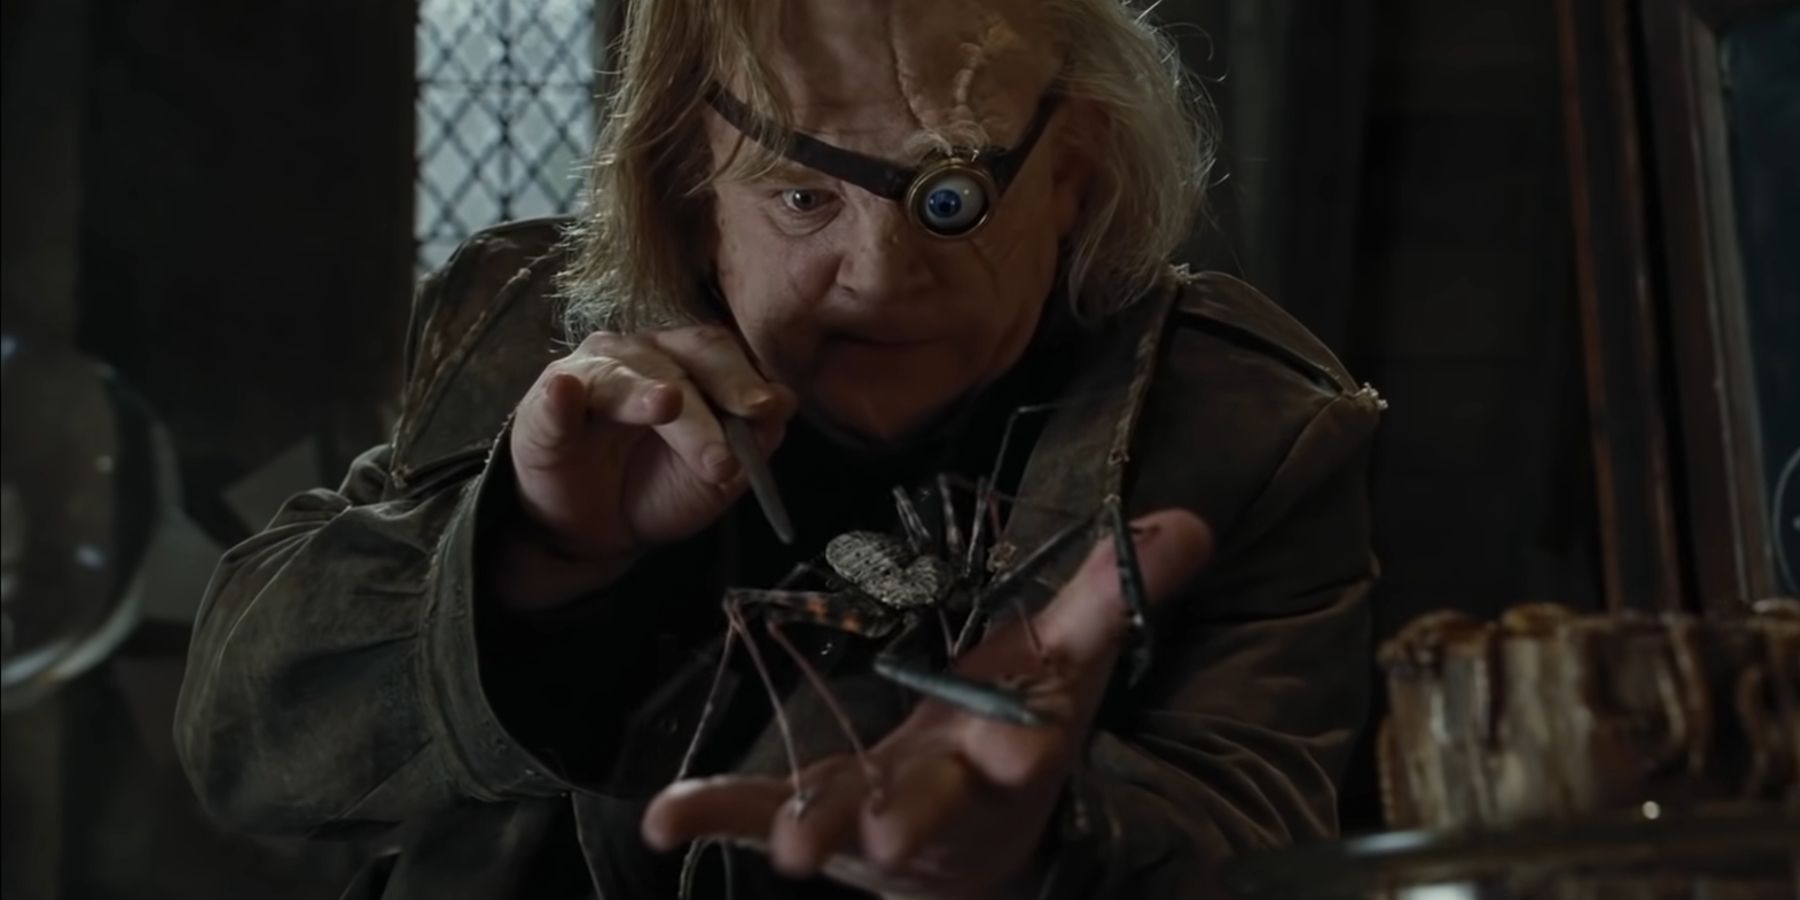 Alastor Mad-Eye Moody using the Imperious curse upon a spider in Harry Potter And The Goblet Of Fire